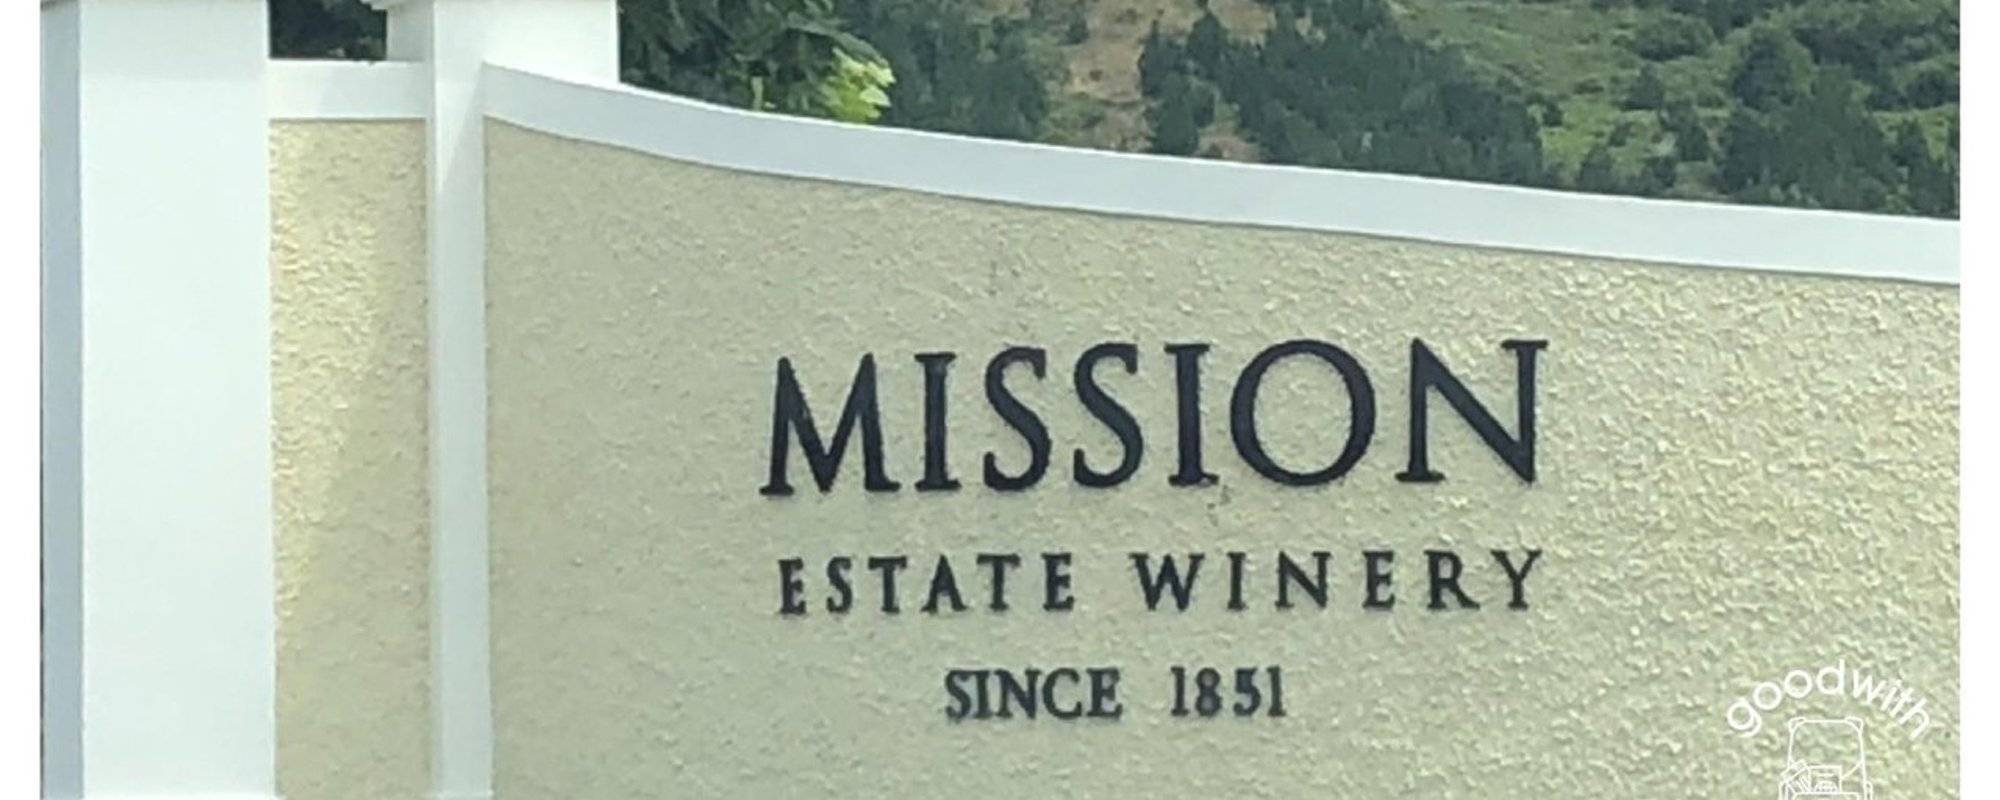 Mission Estate Winery, Napier, New Zealand